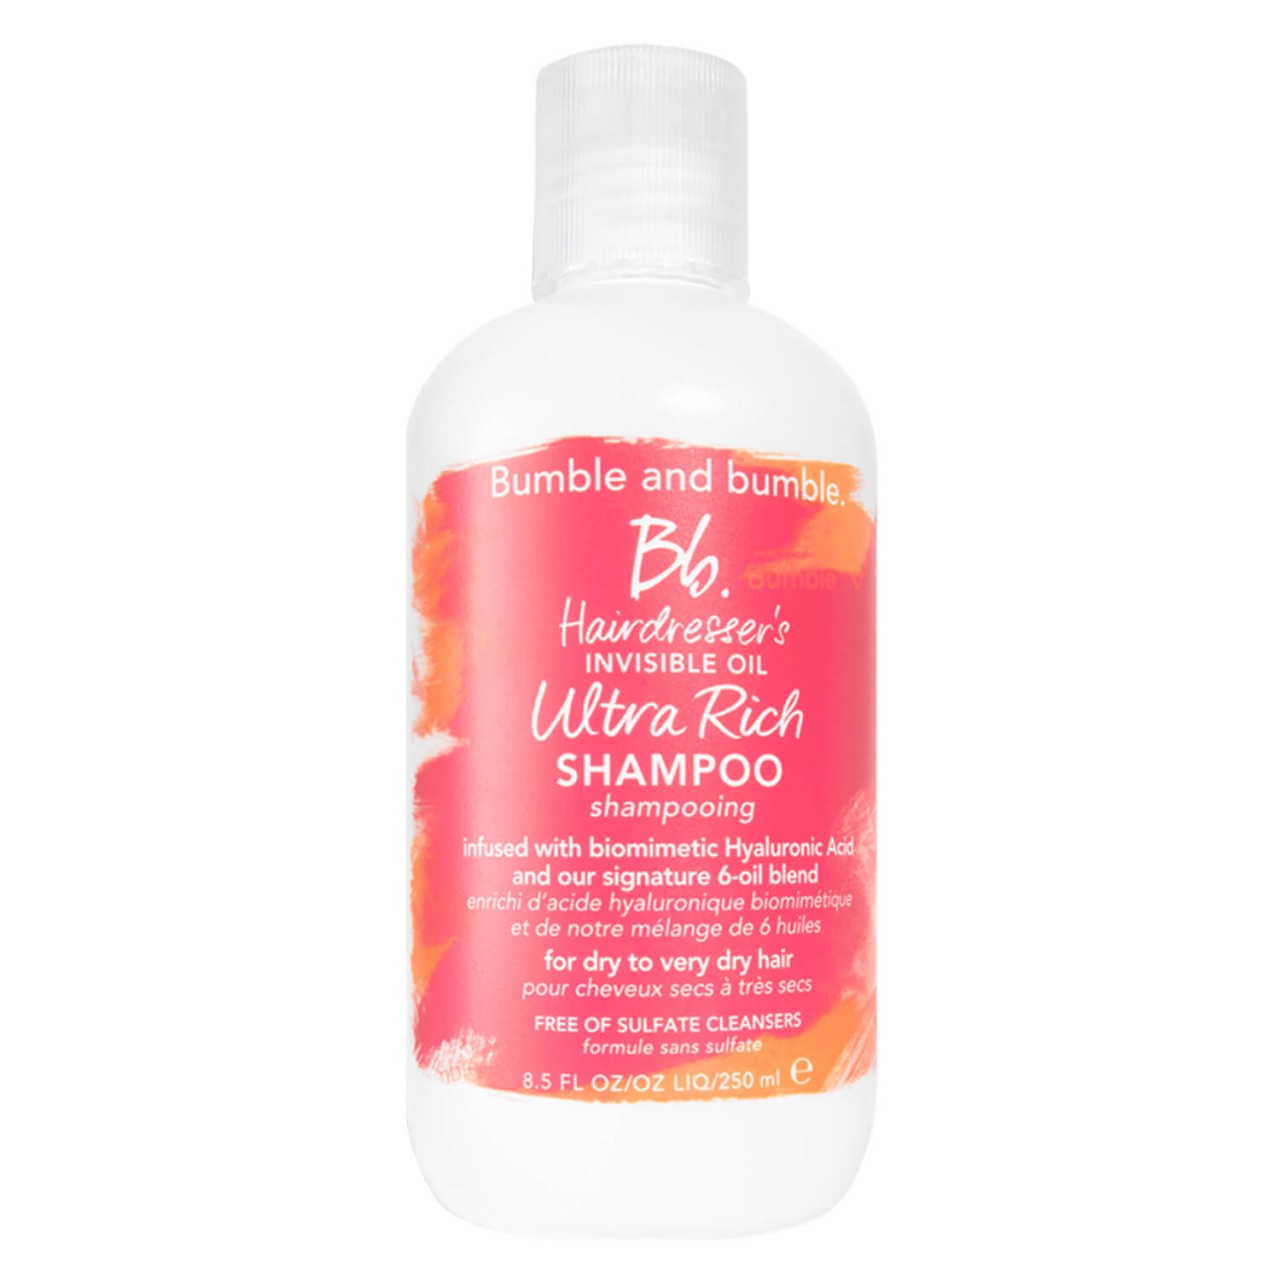 Bb. Hairdresser's Invisible Oil - Ultra Rich Shampoo von Bumble and bumble.